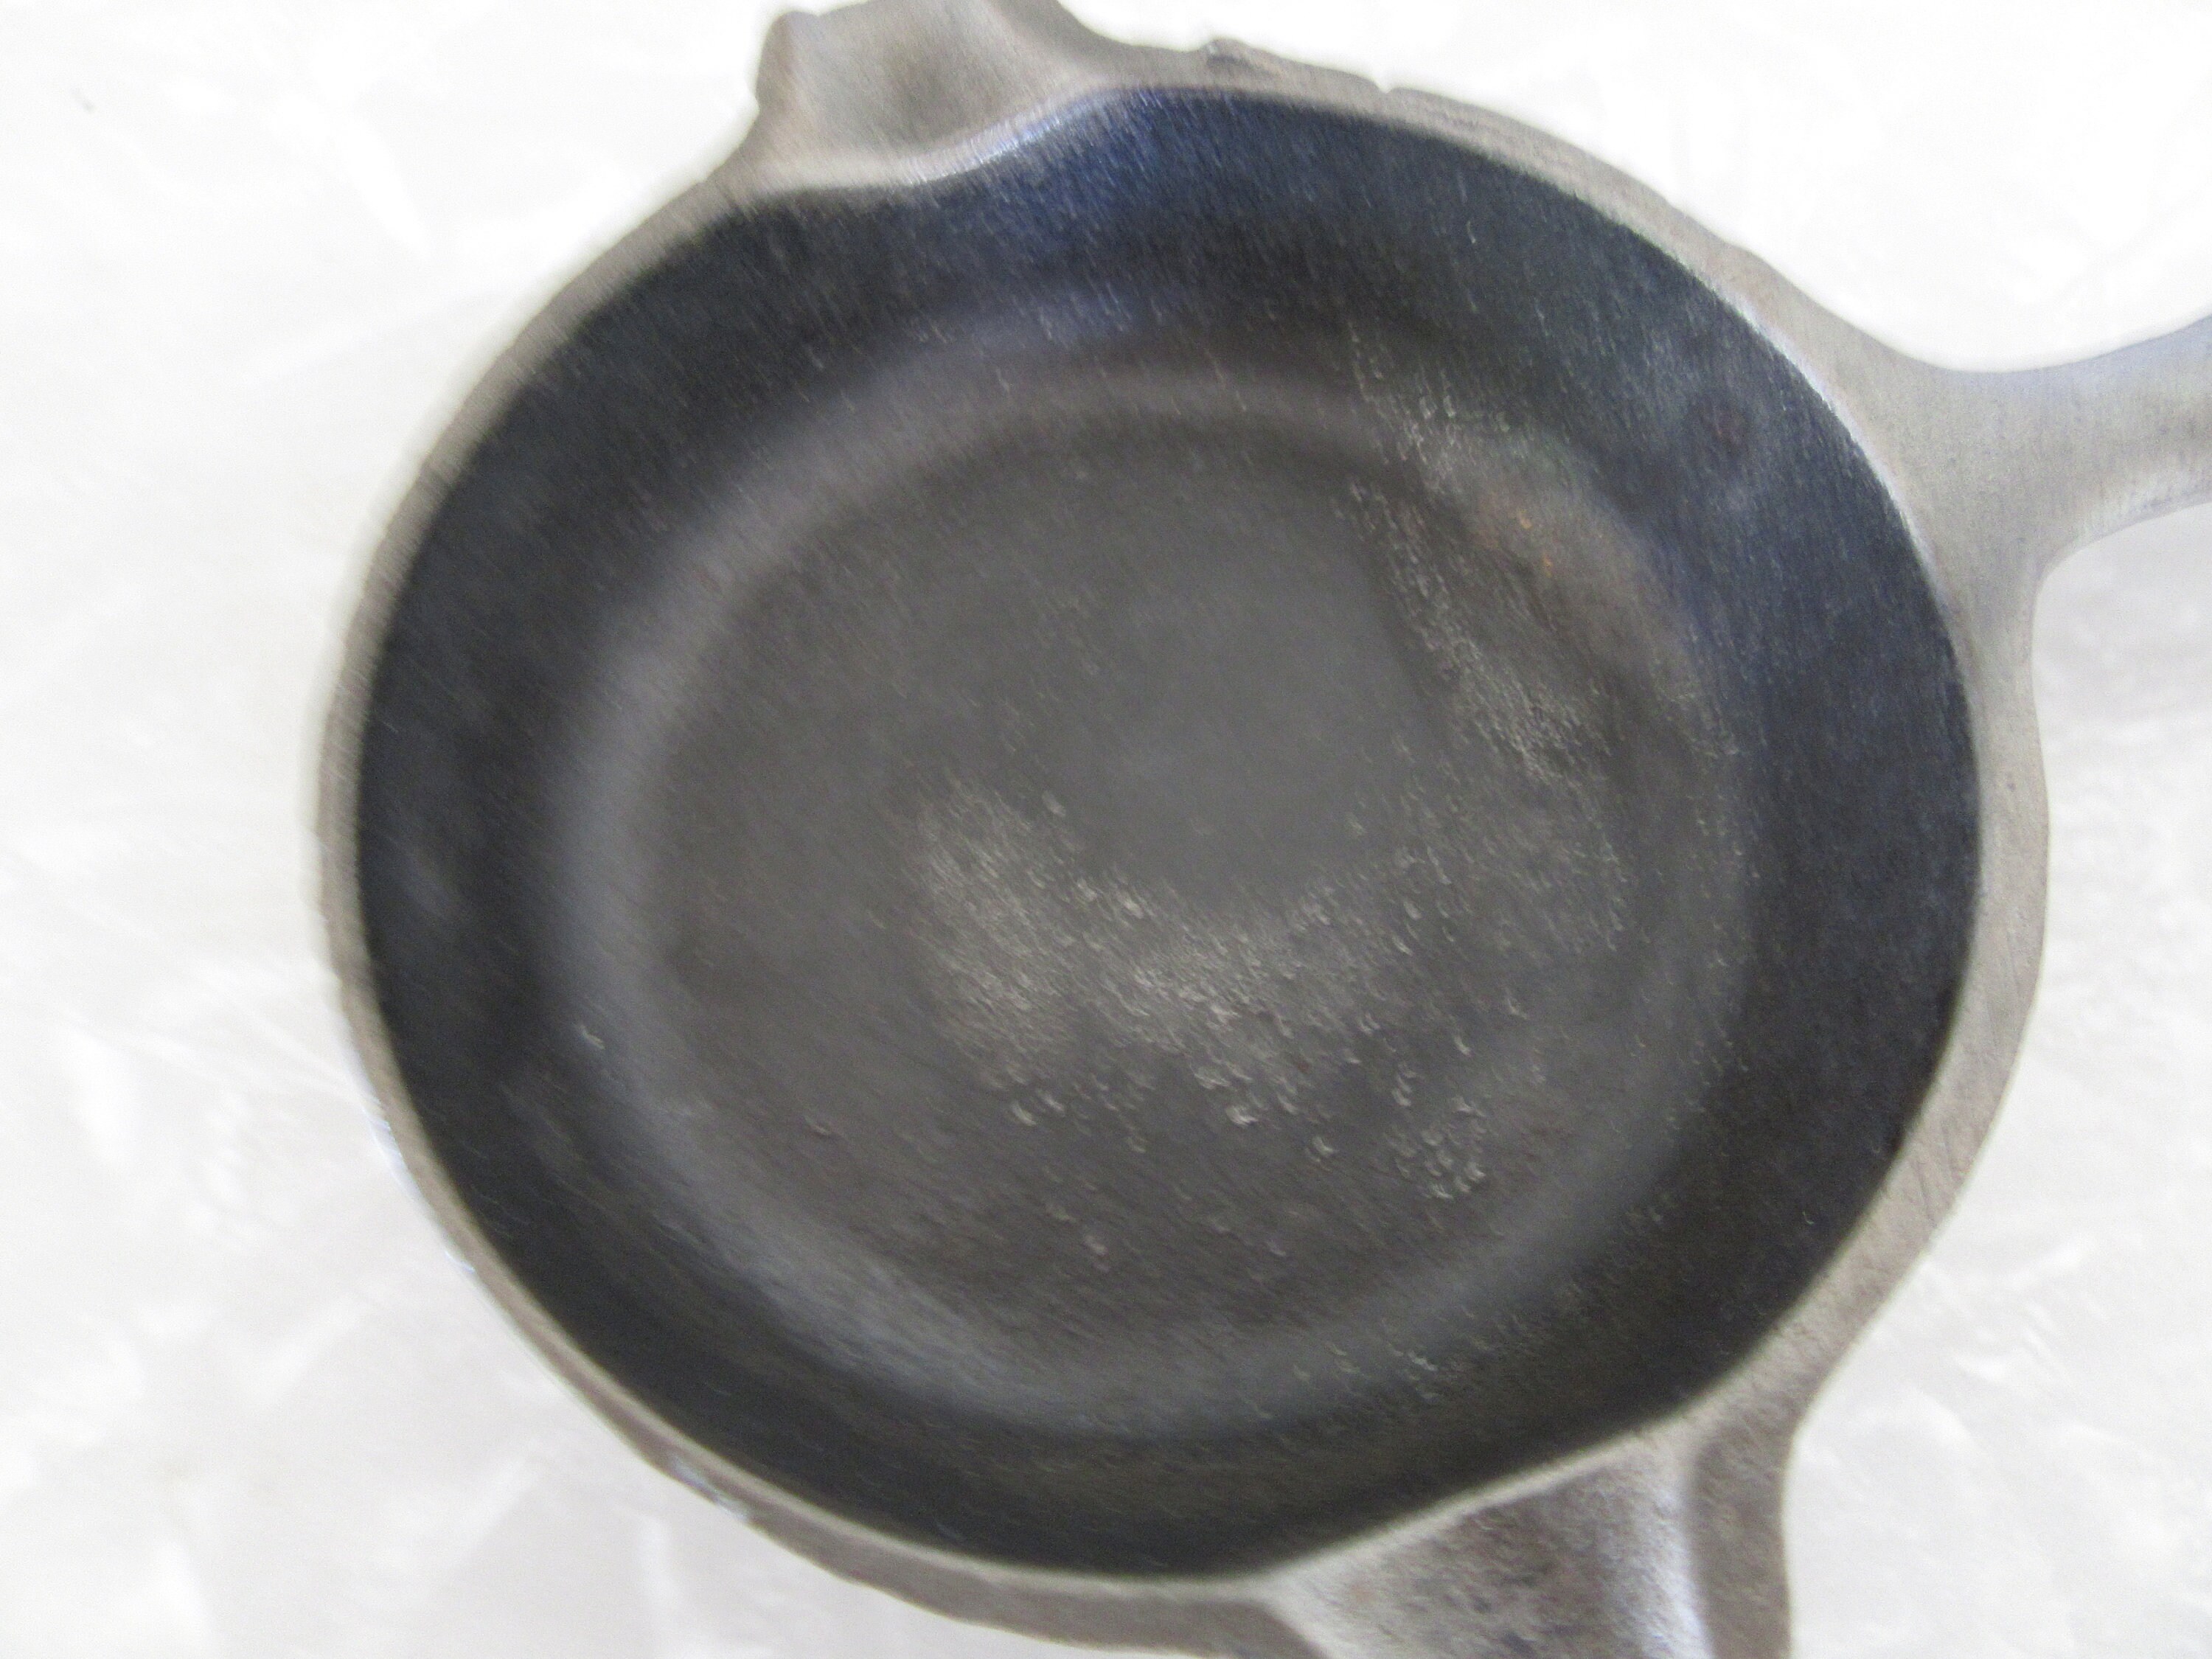 Vintage Cast Iron Skillet Pan Wagnerware 1050 Very Small Butter